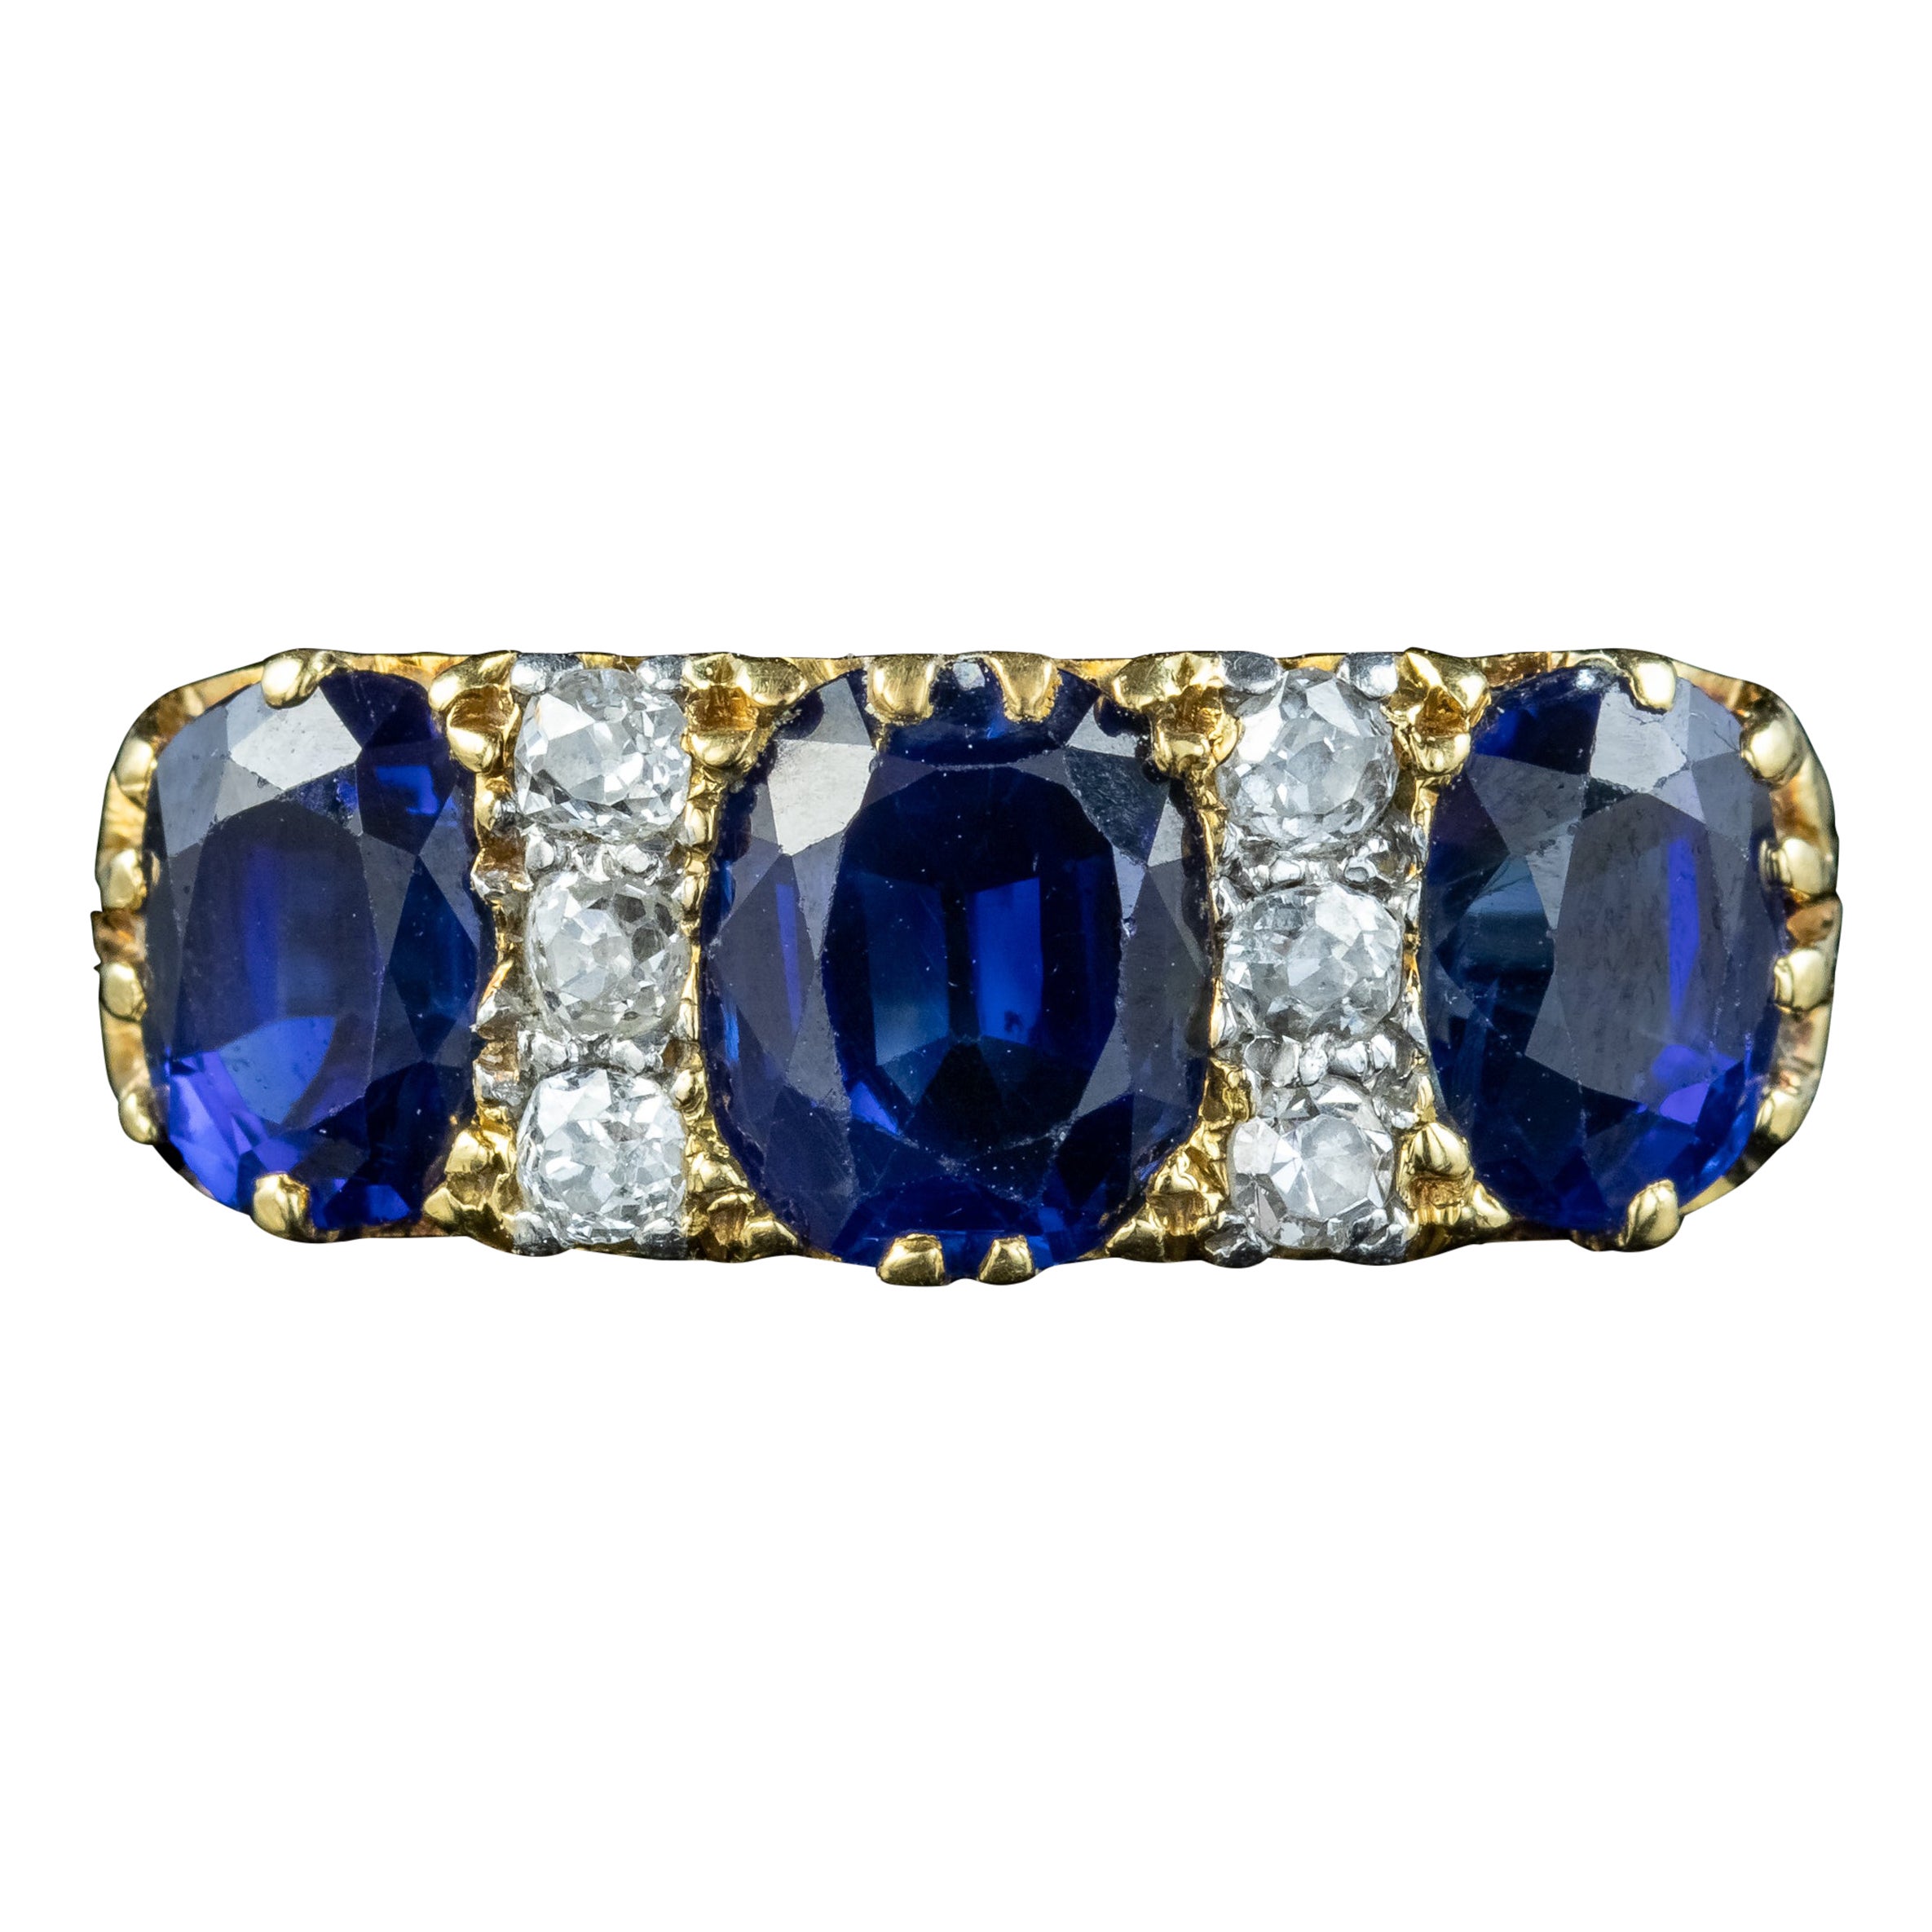 Antique Edwardian Sapphire Diamond Ring 2.7ct Sapphire With Cert For Sale